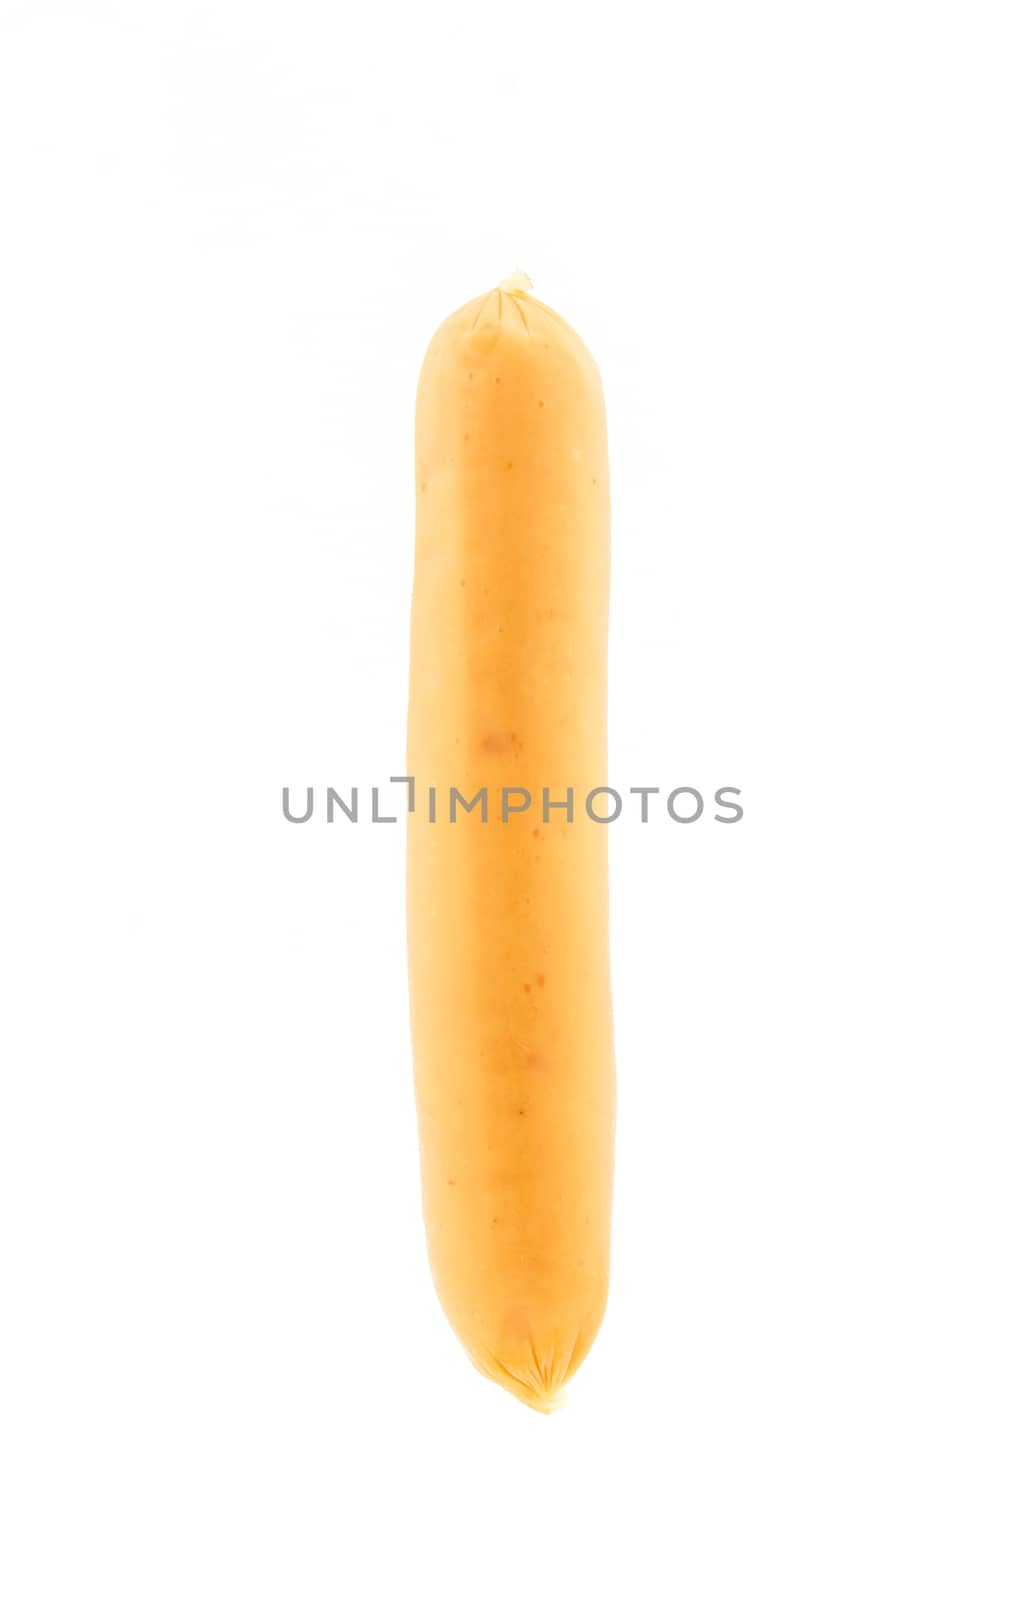 Sausage on white background by vitawin